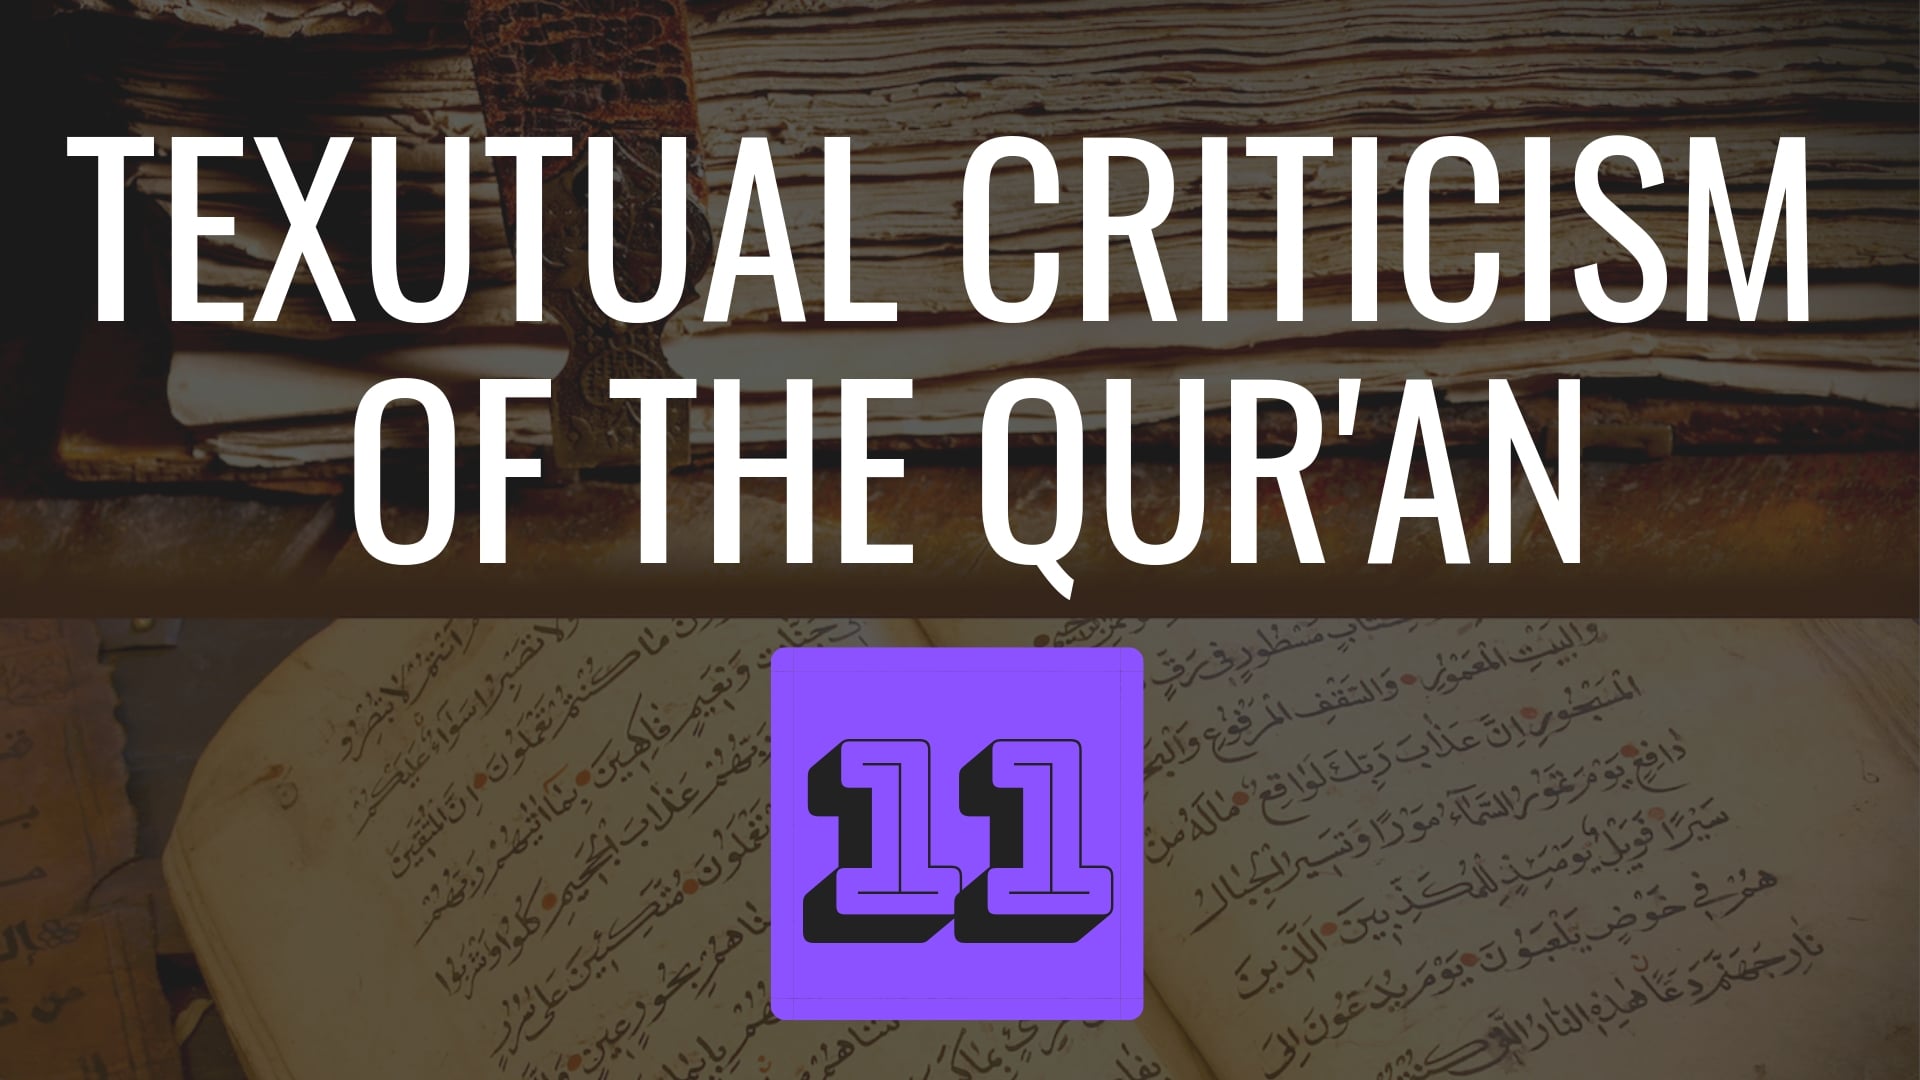 Textual Criticism of the Qur’an